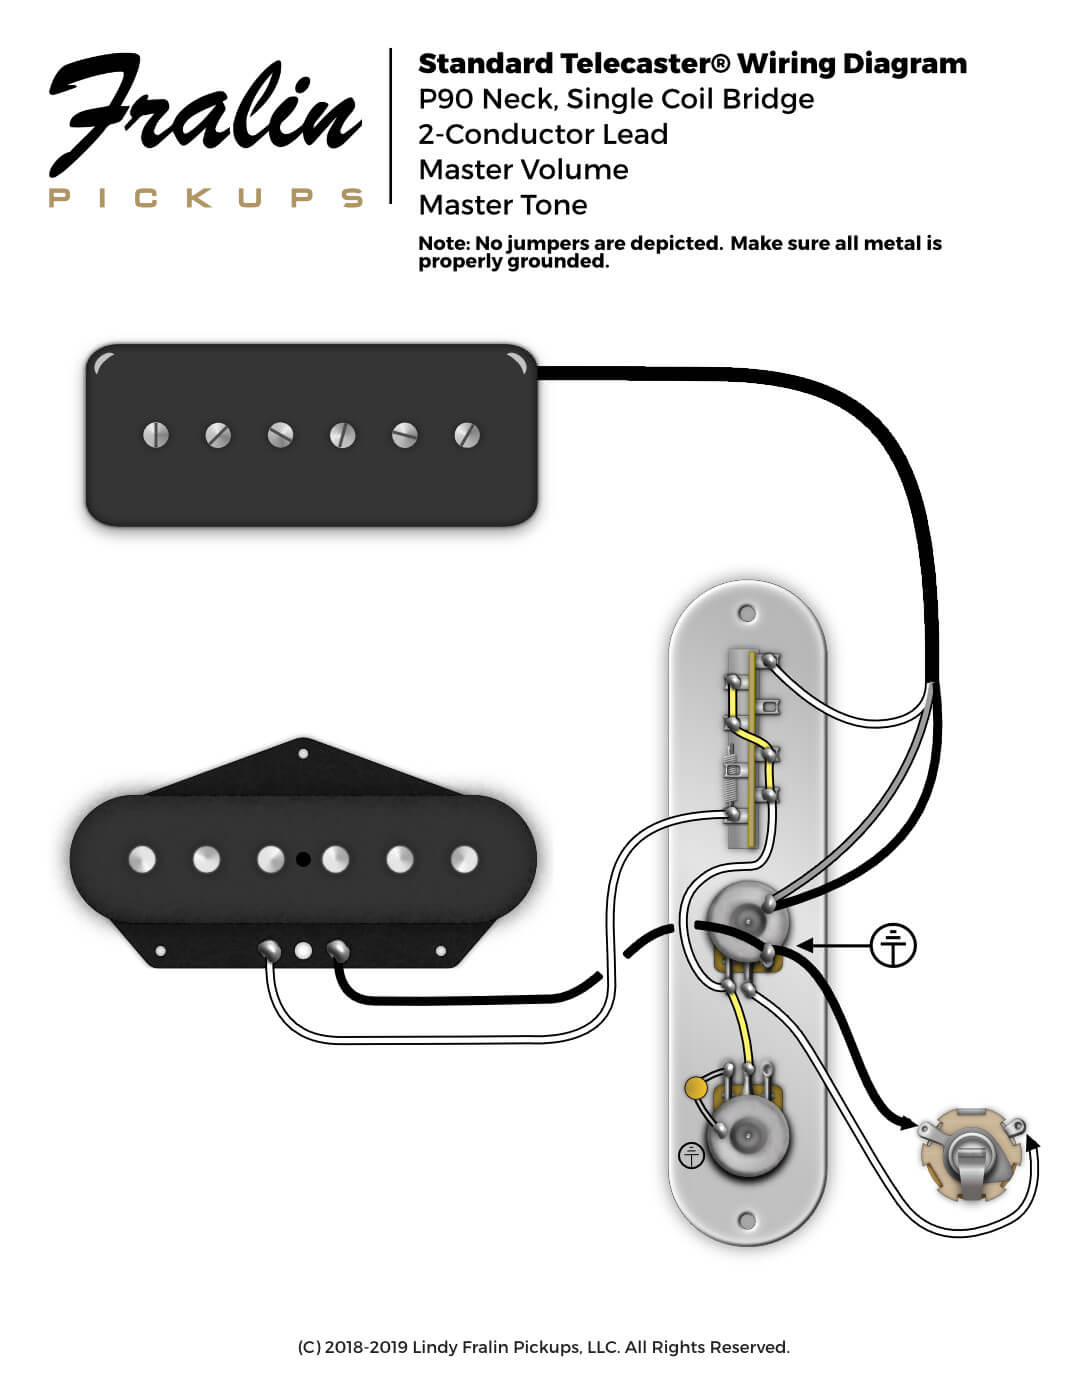 Telecaster Wiring Diagram with P90 Neck